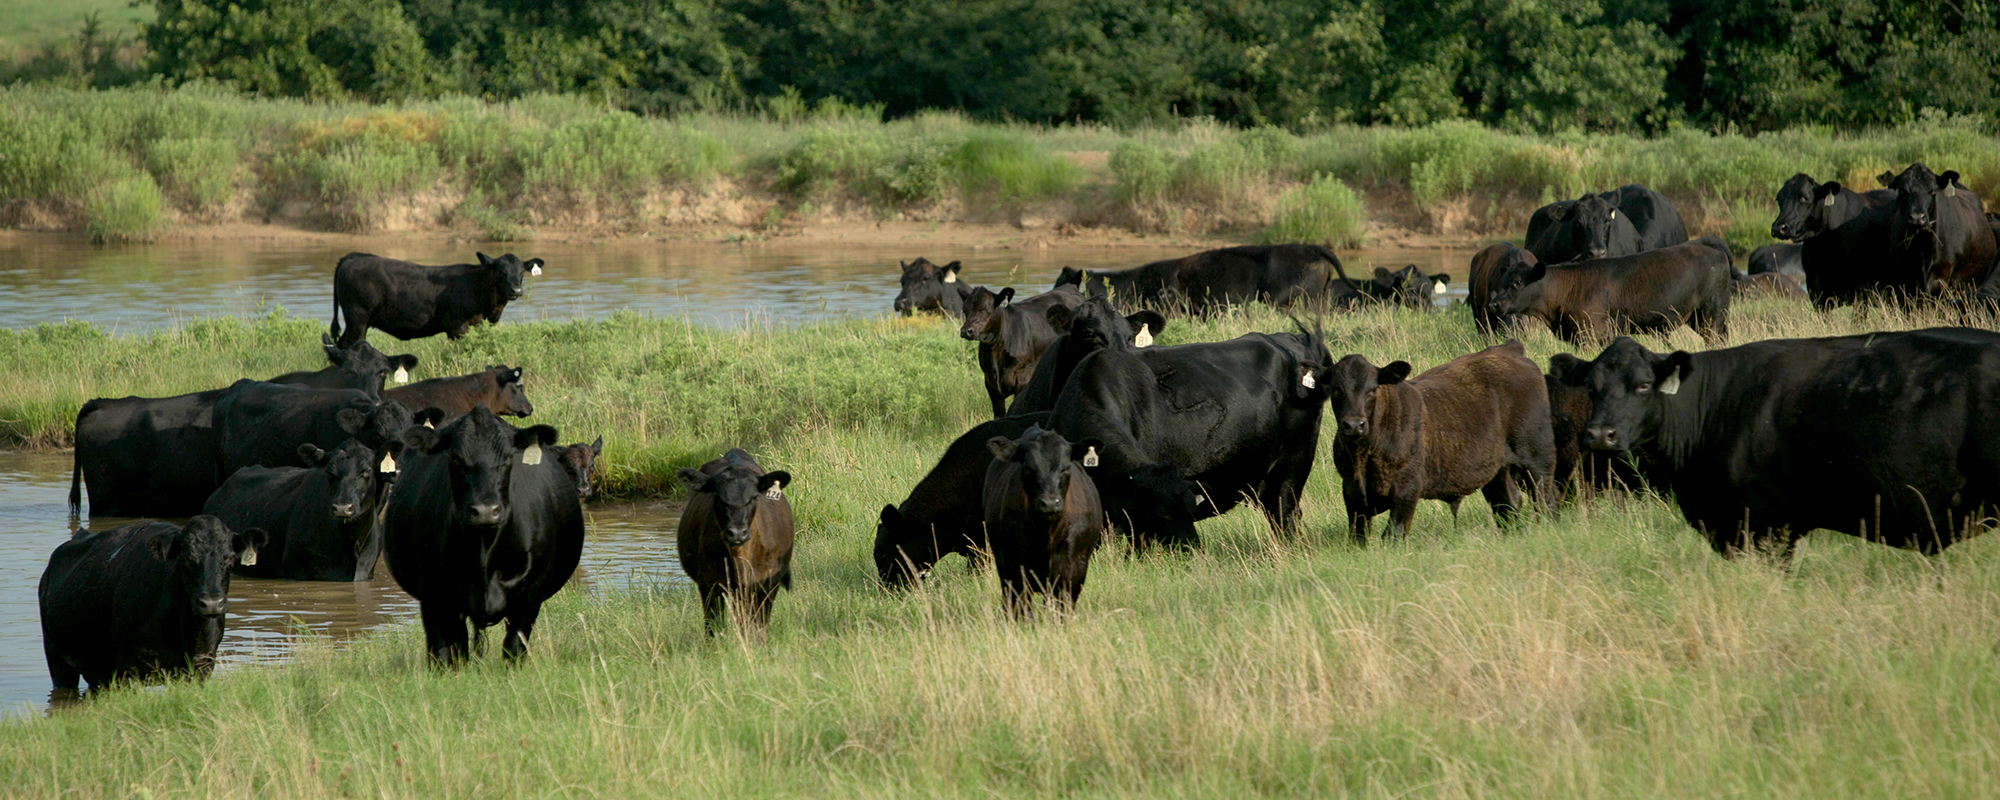 Consider Water Impoundments and Streams When Grazing Livestock